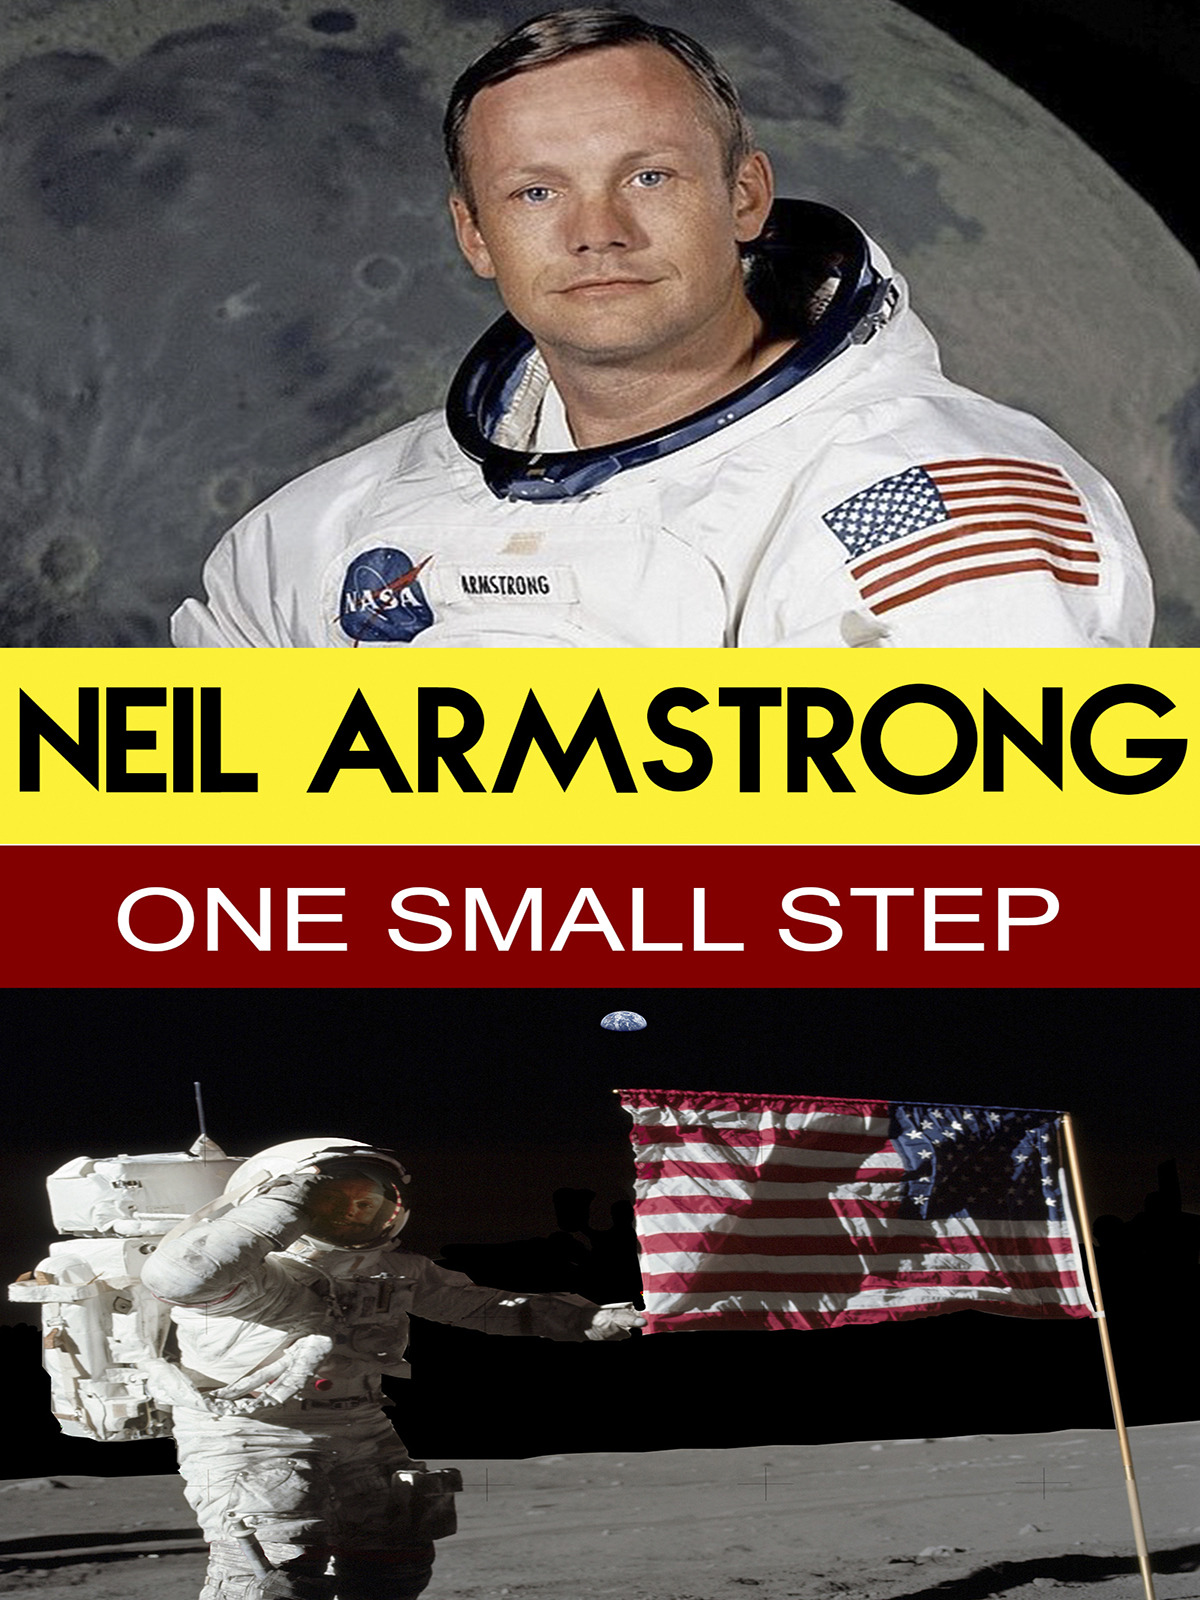 L7832 - Neil Armstrong - One Small Step